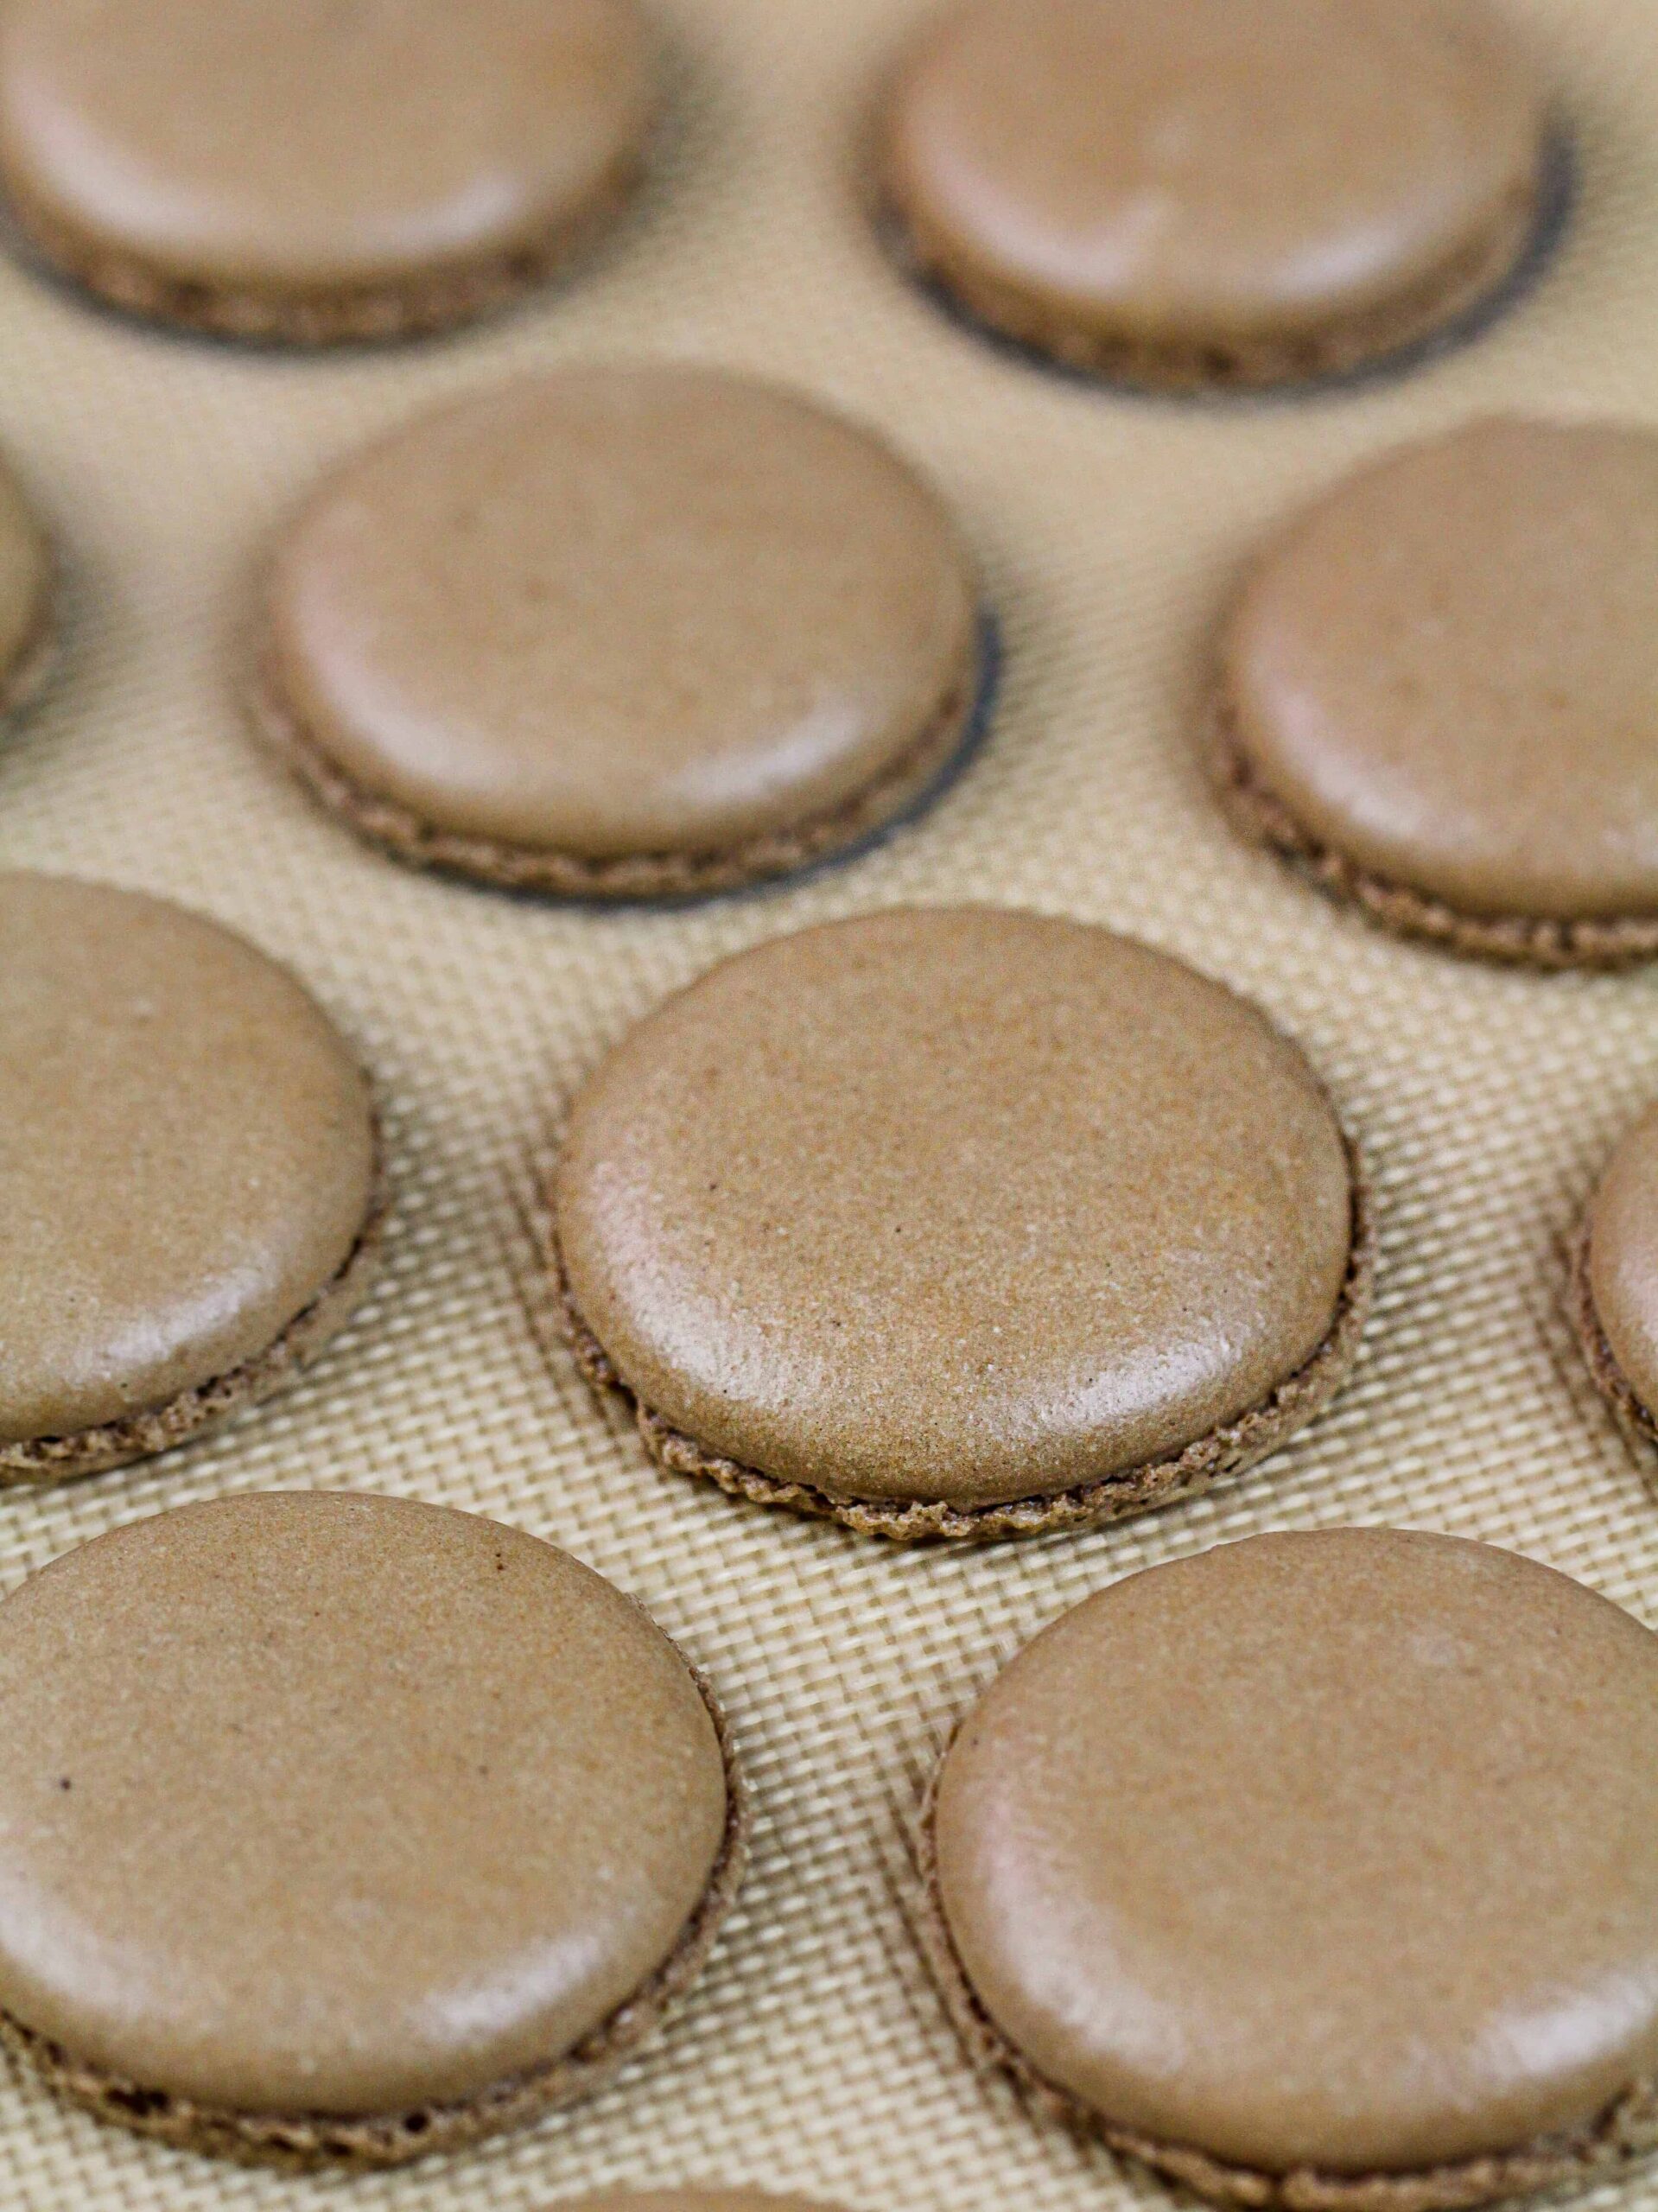 image of chocolate macaron shells baked on a silpat mat and cooling